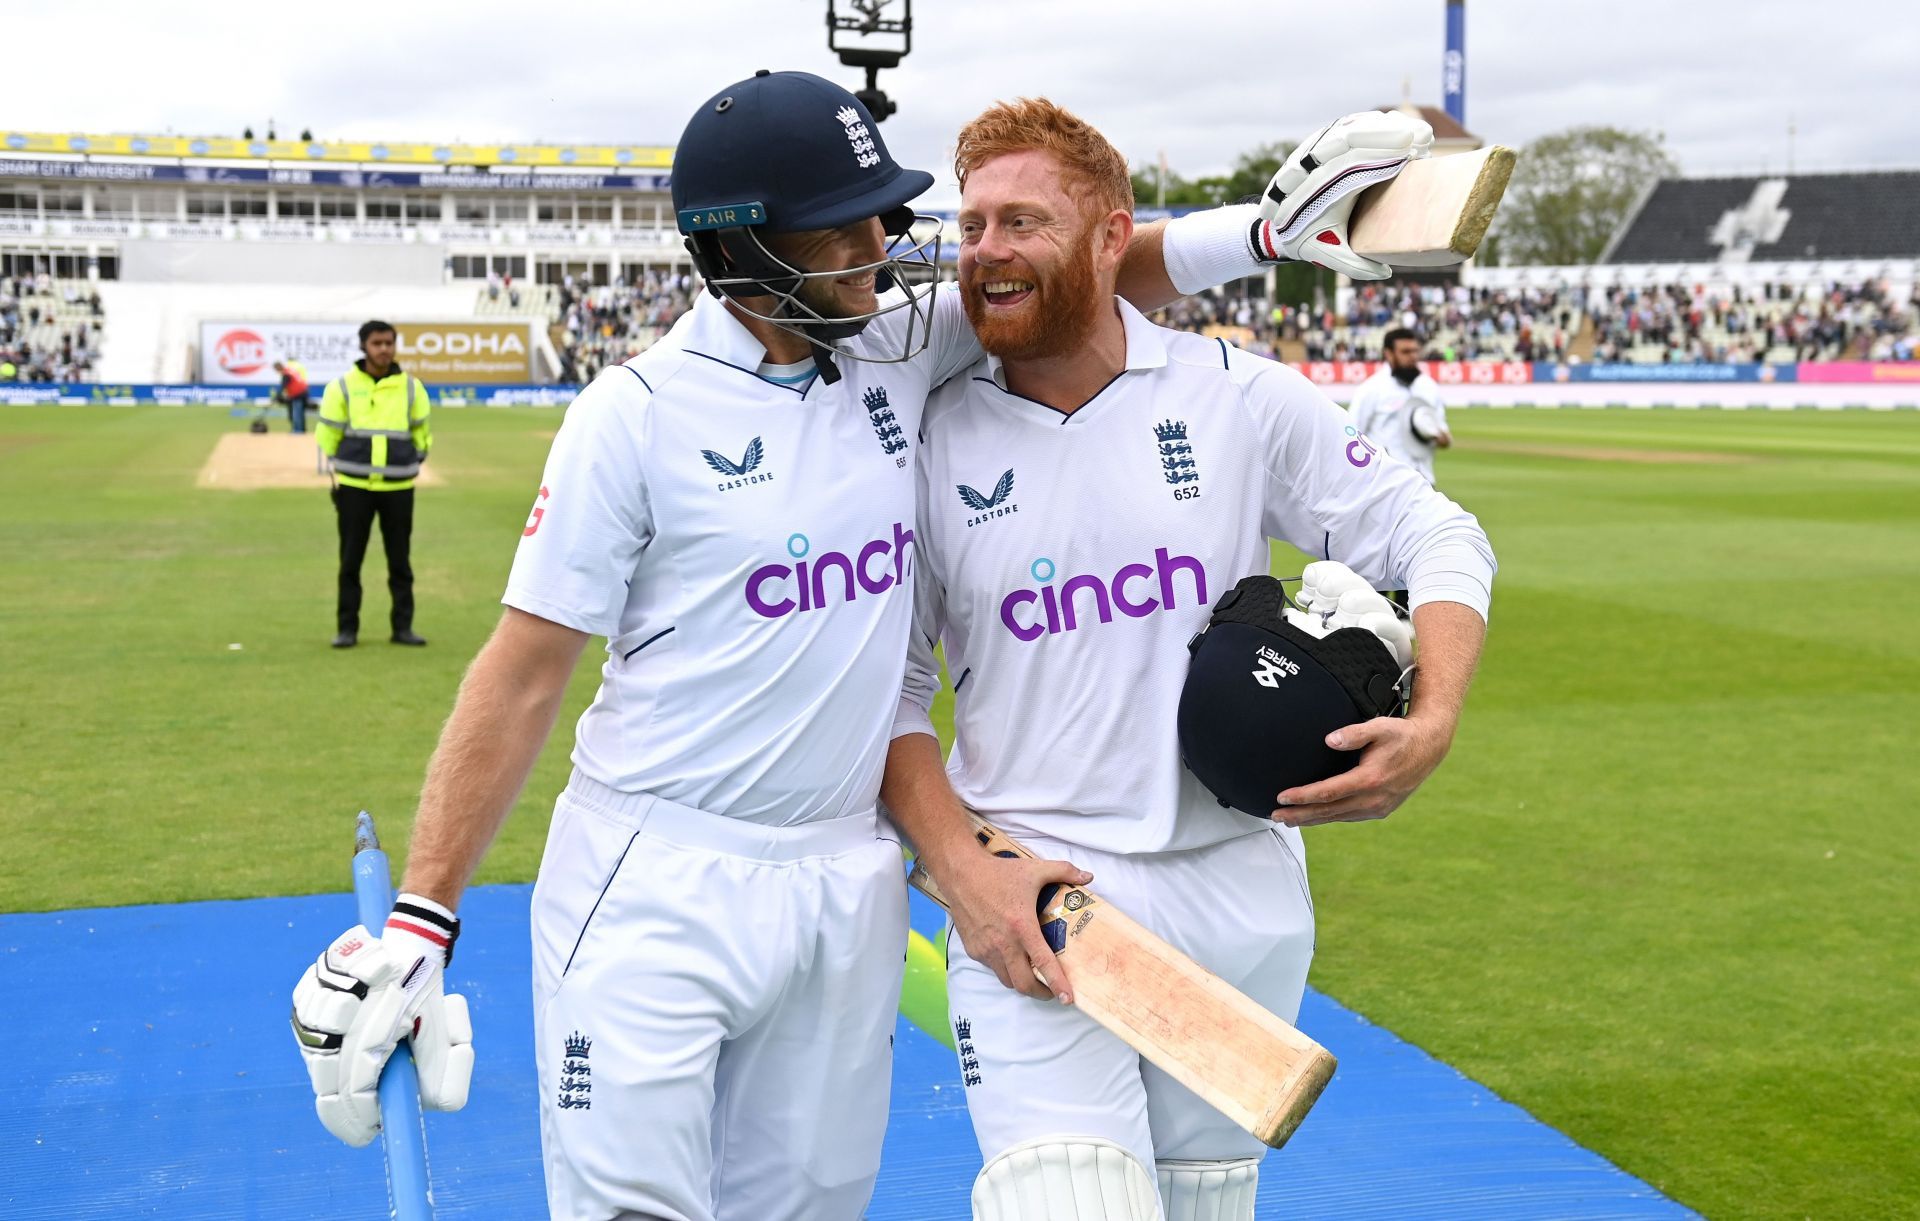 Joe Root and Jonny Bairstow were unstoppable in their run-chase against India.